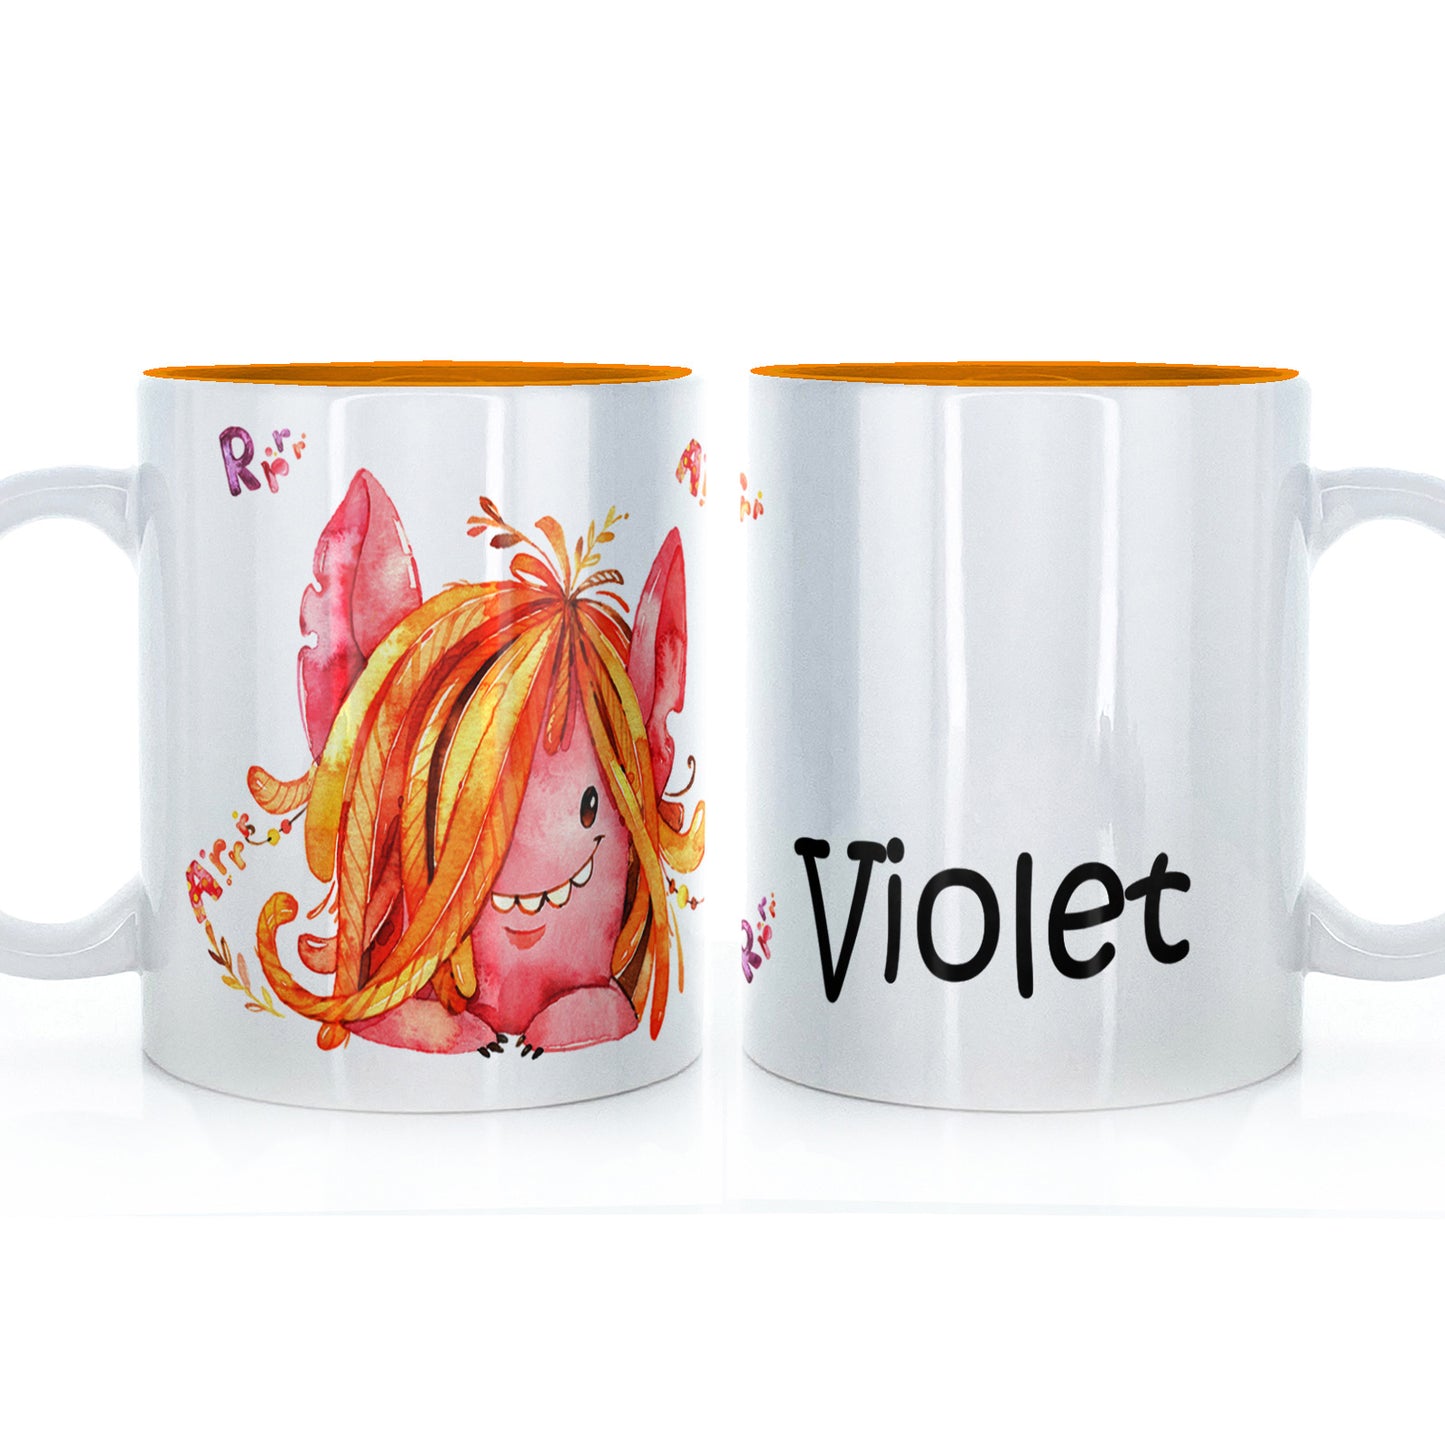 Personalised Mug with Childish Text and Hairy Growling Red Monster